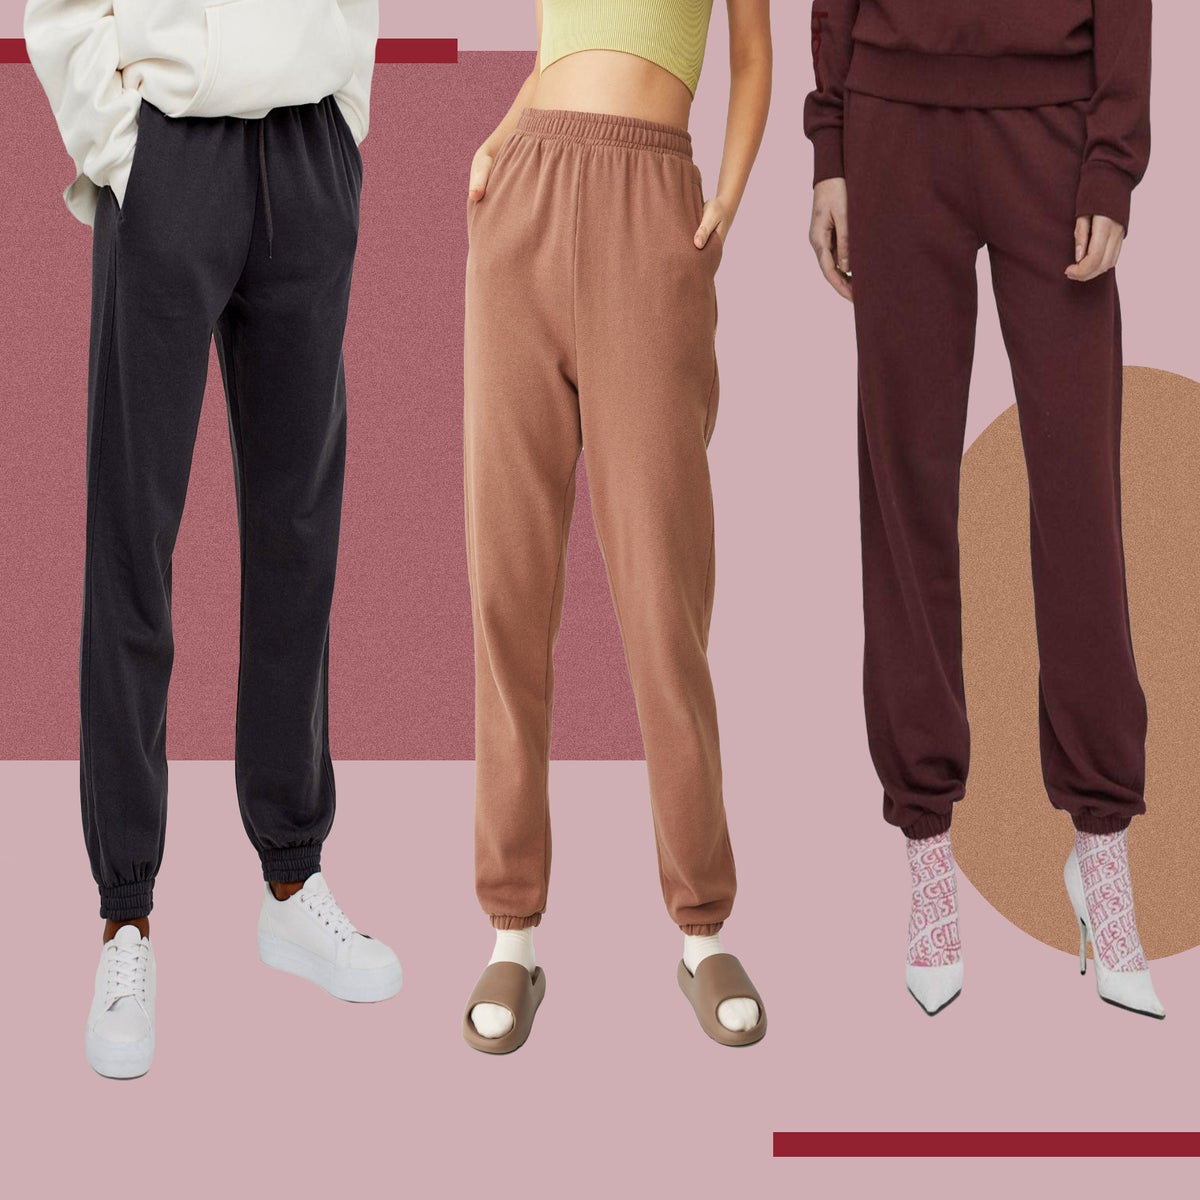 Best joggers for women 2021: Fleeced lined designs for travel and more